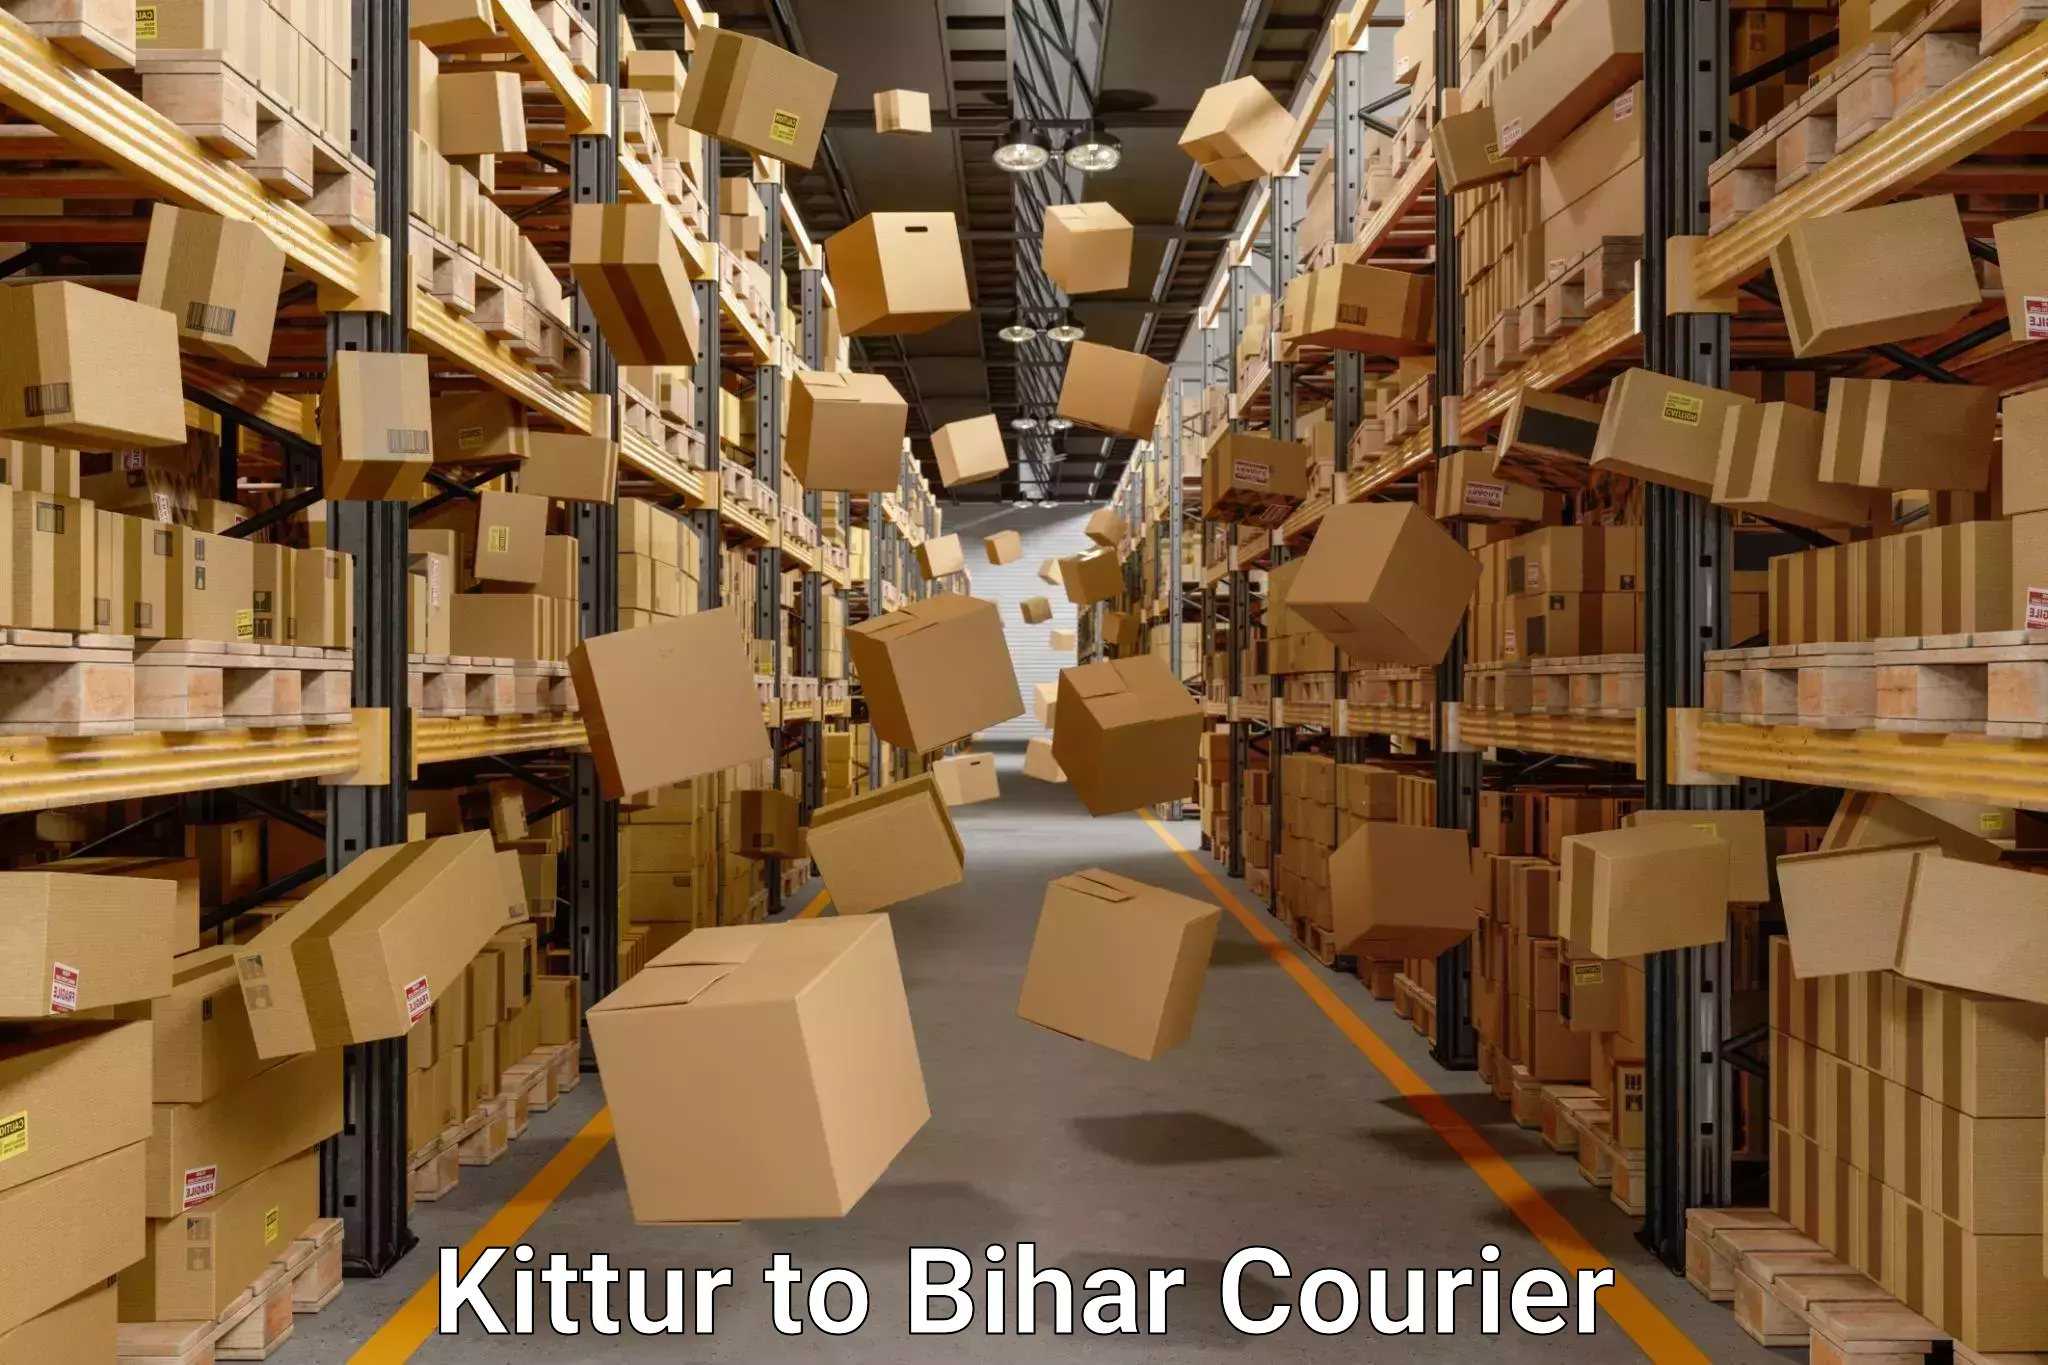 Trusted relocation experts Kittur to Bettiah